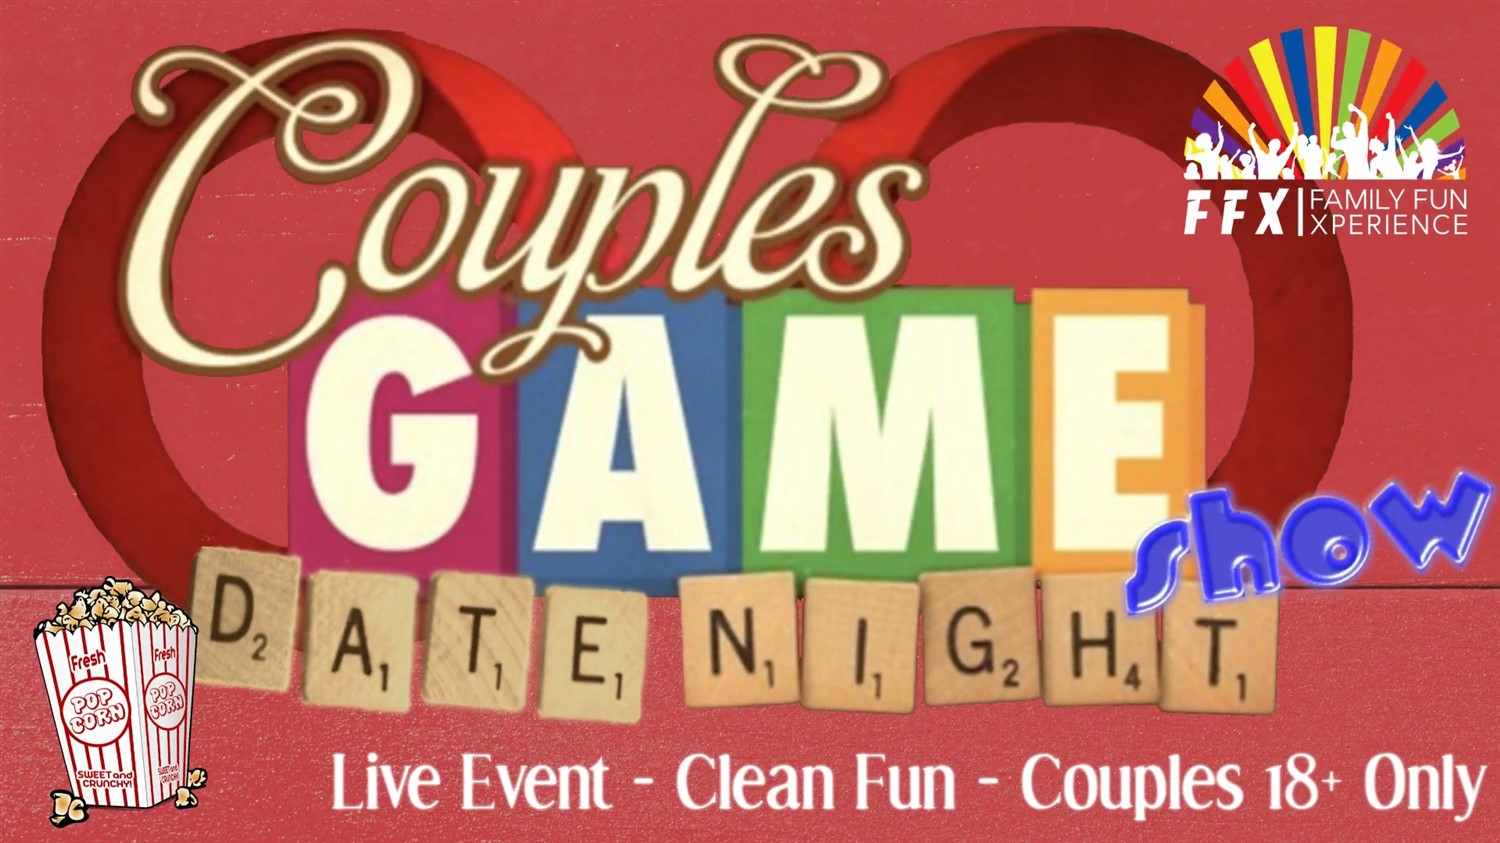 Couples Date Night Game Show! Live - Couples Only - FUN! on Aug 18, 19:00@FFX Theatre - Pick a seat, Buy tickets and Get information on Family Fun Xperience tickets.ffxshow.org